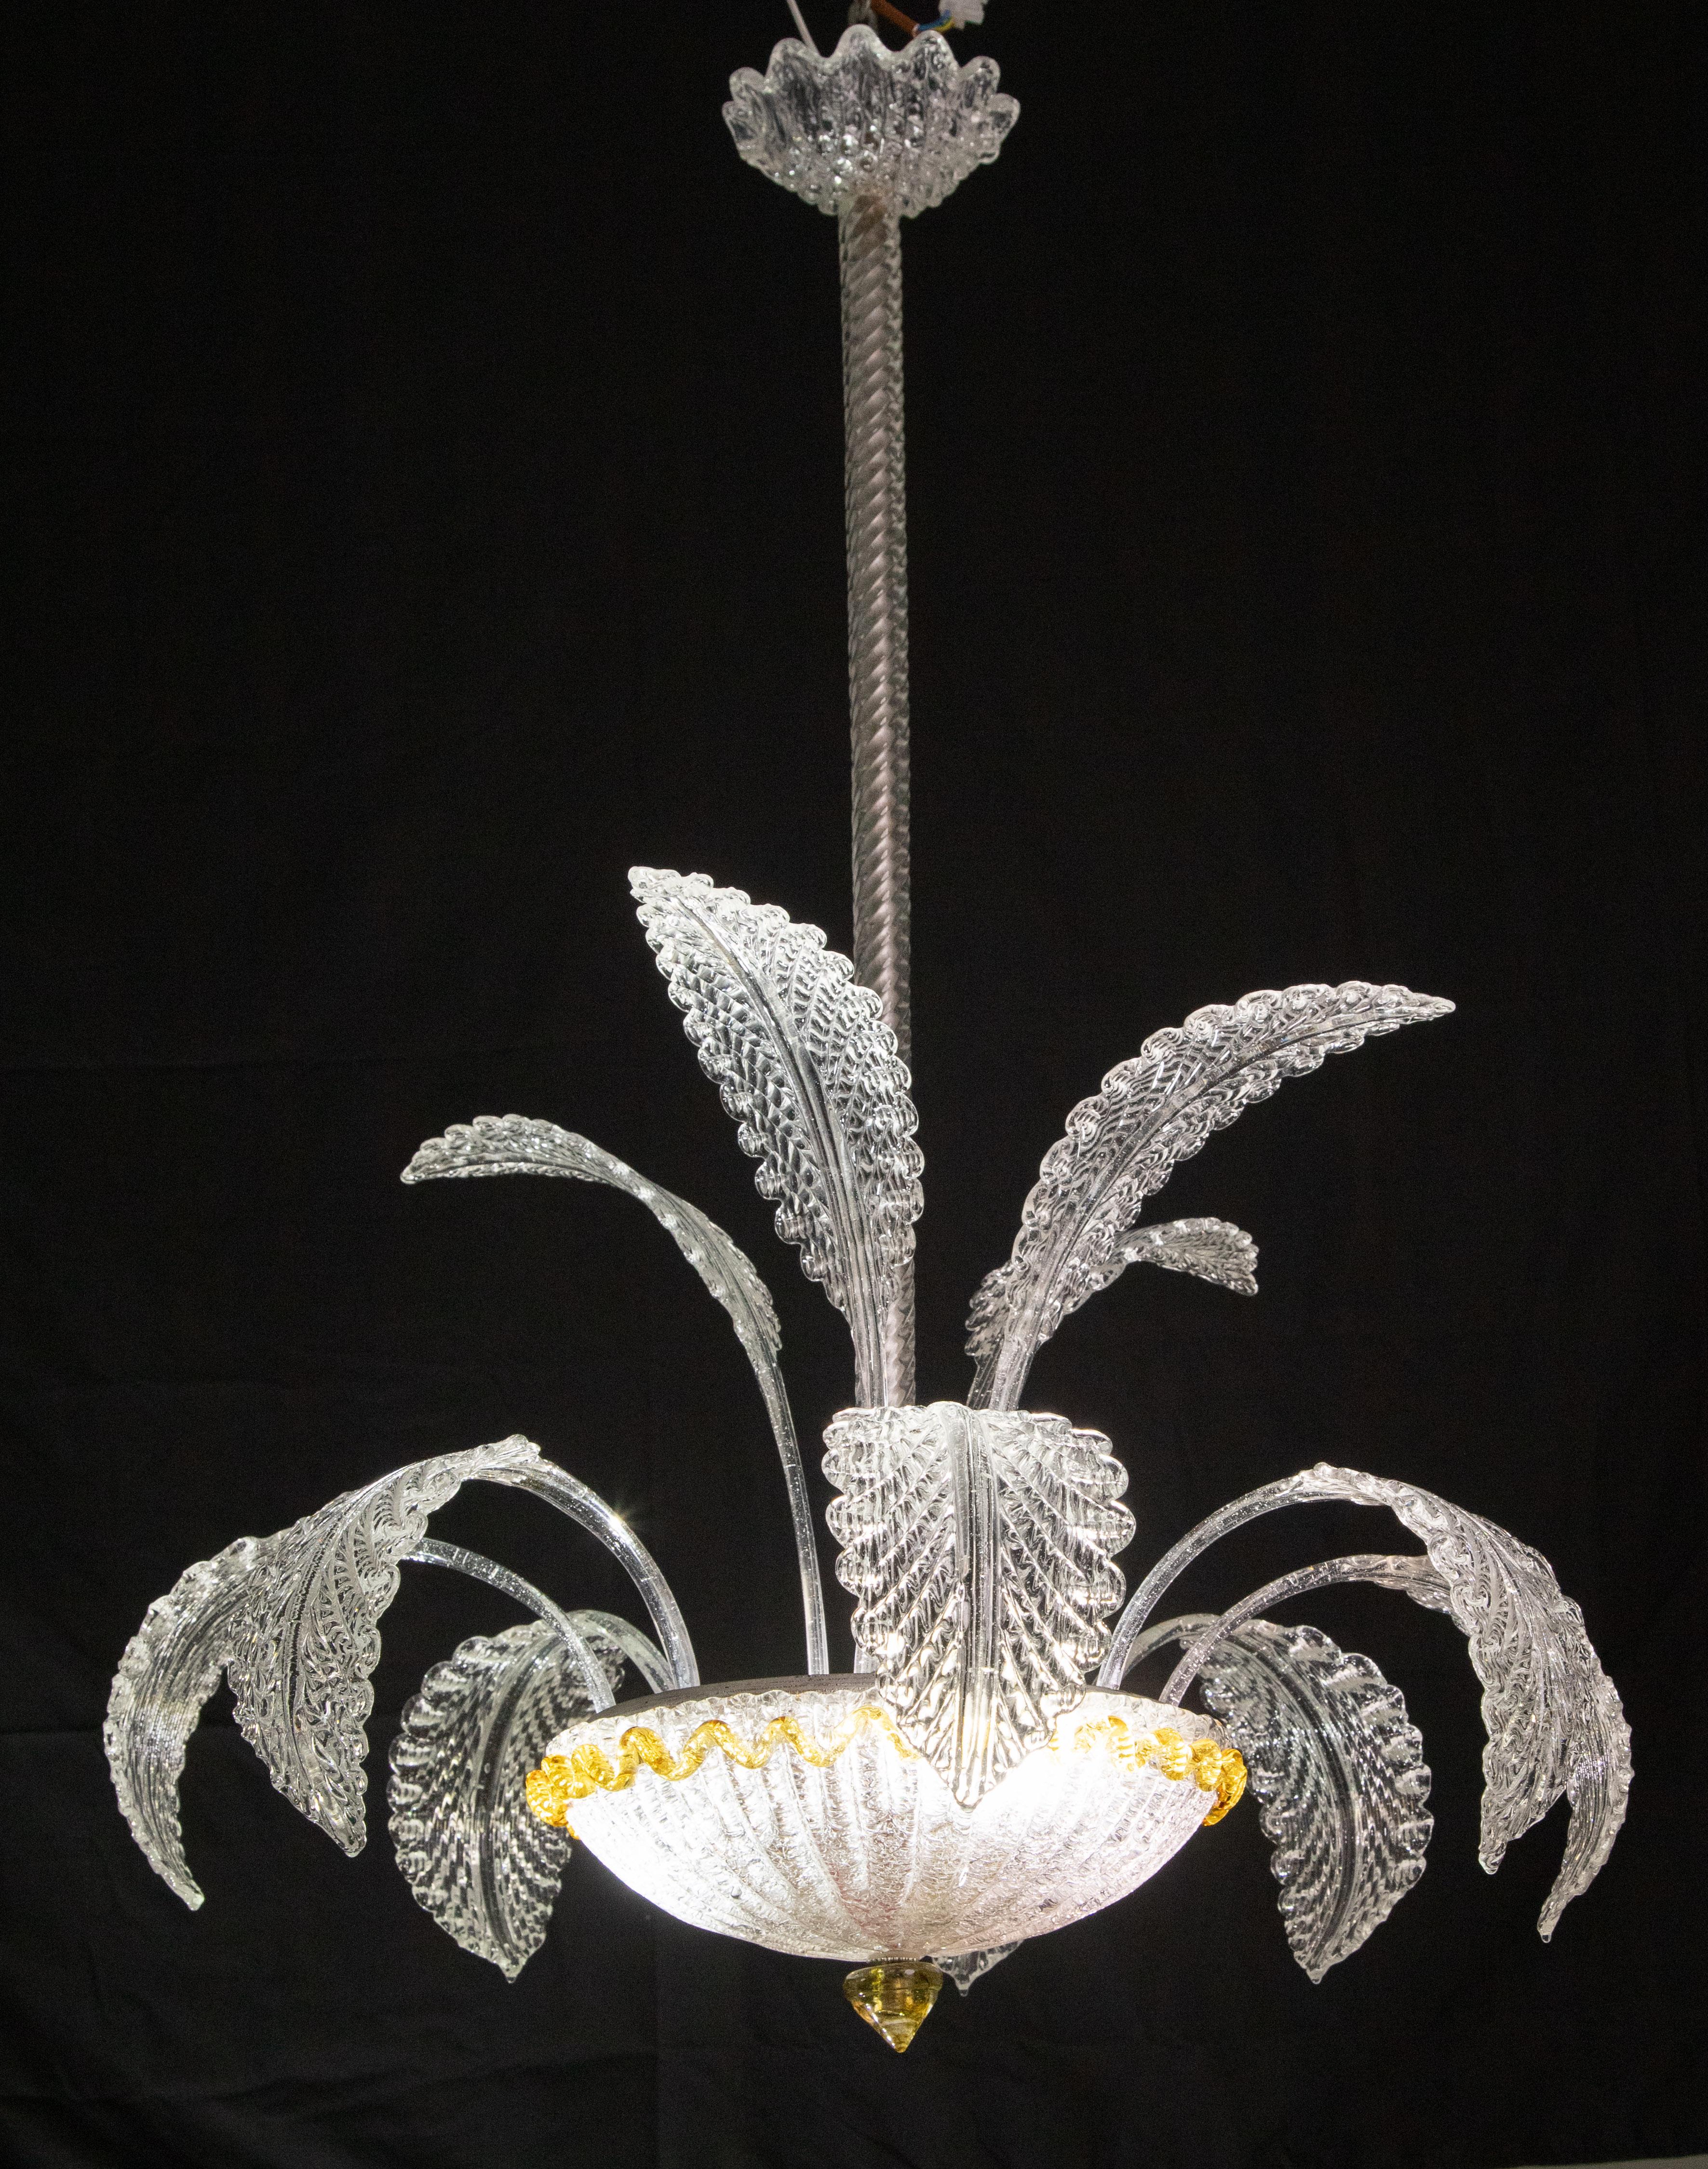 Splendid Murano chandelier with high and low leaves

The chandelier measures 105 cm in height and 85 cm diameter.

Possible to rewire for Usa.

Good vintage condition.

3 Light e27 standard European